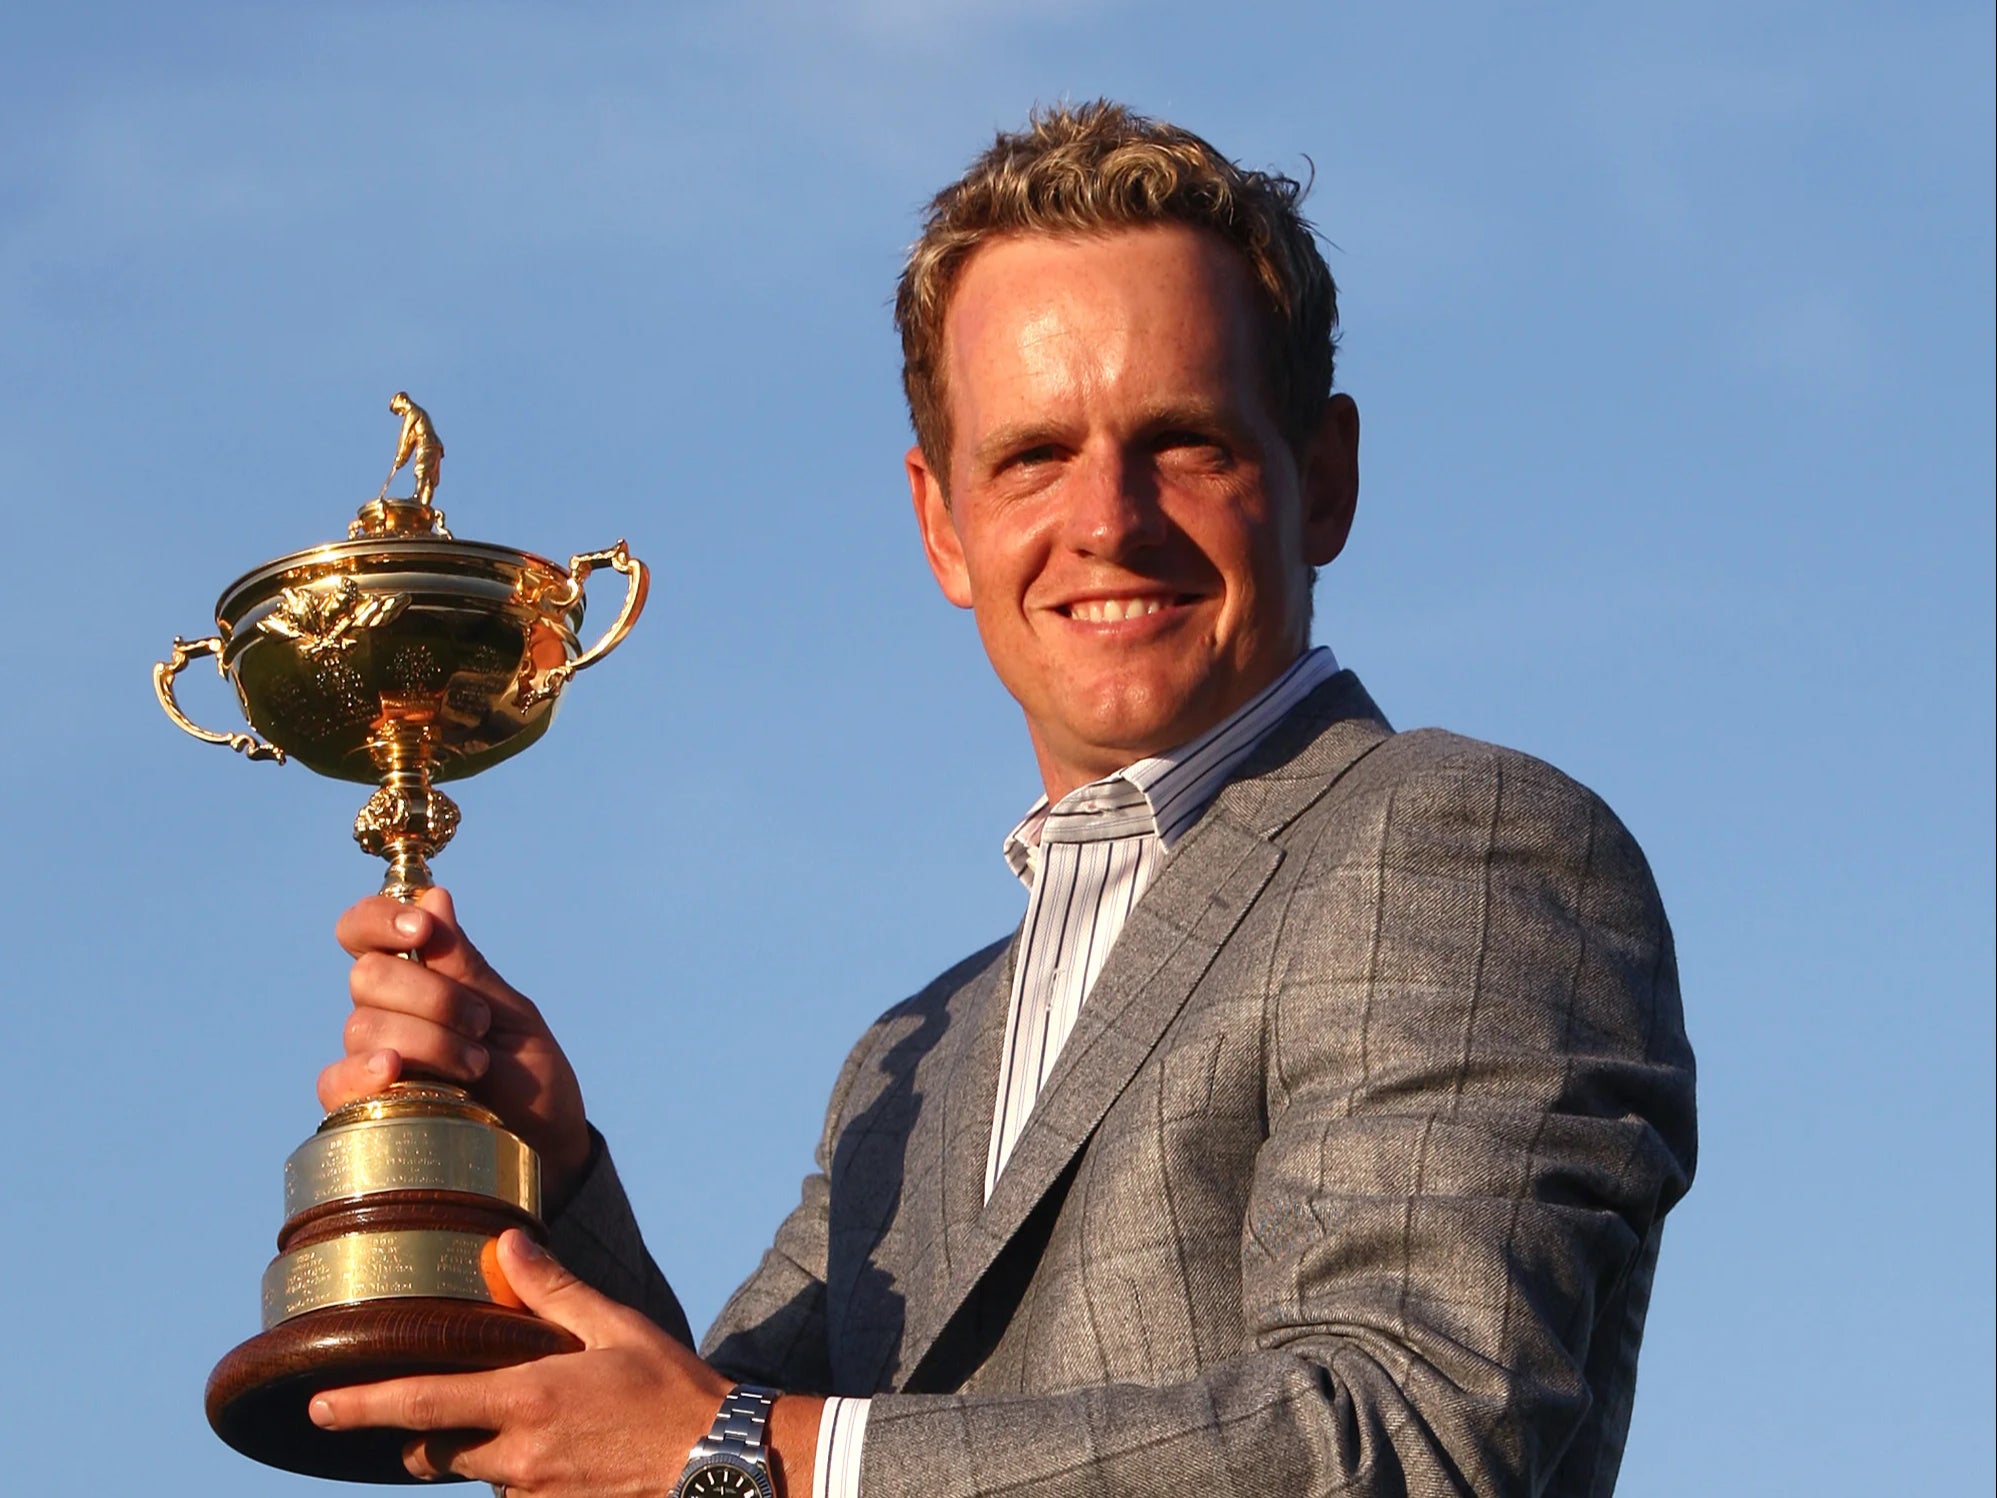 Europe captain Luke Donald will have six wild cards for next year’s Ryder Cup in Rome